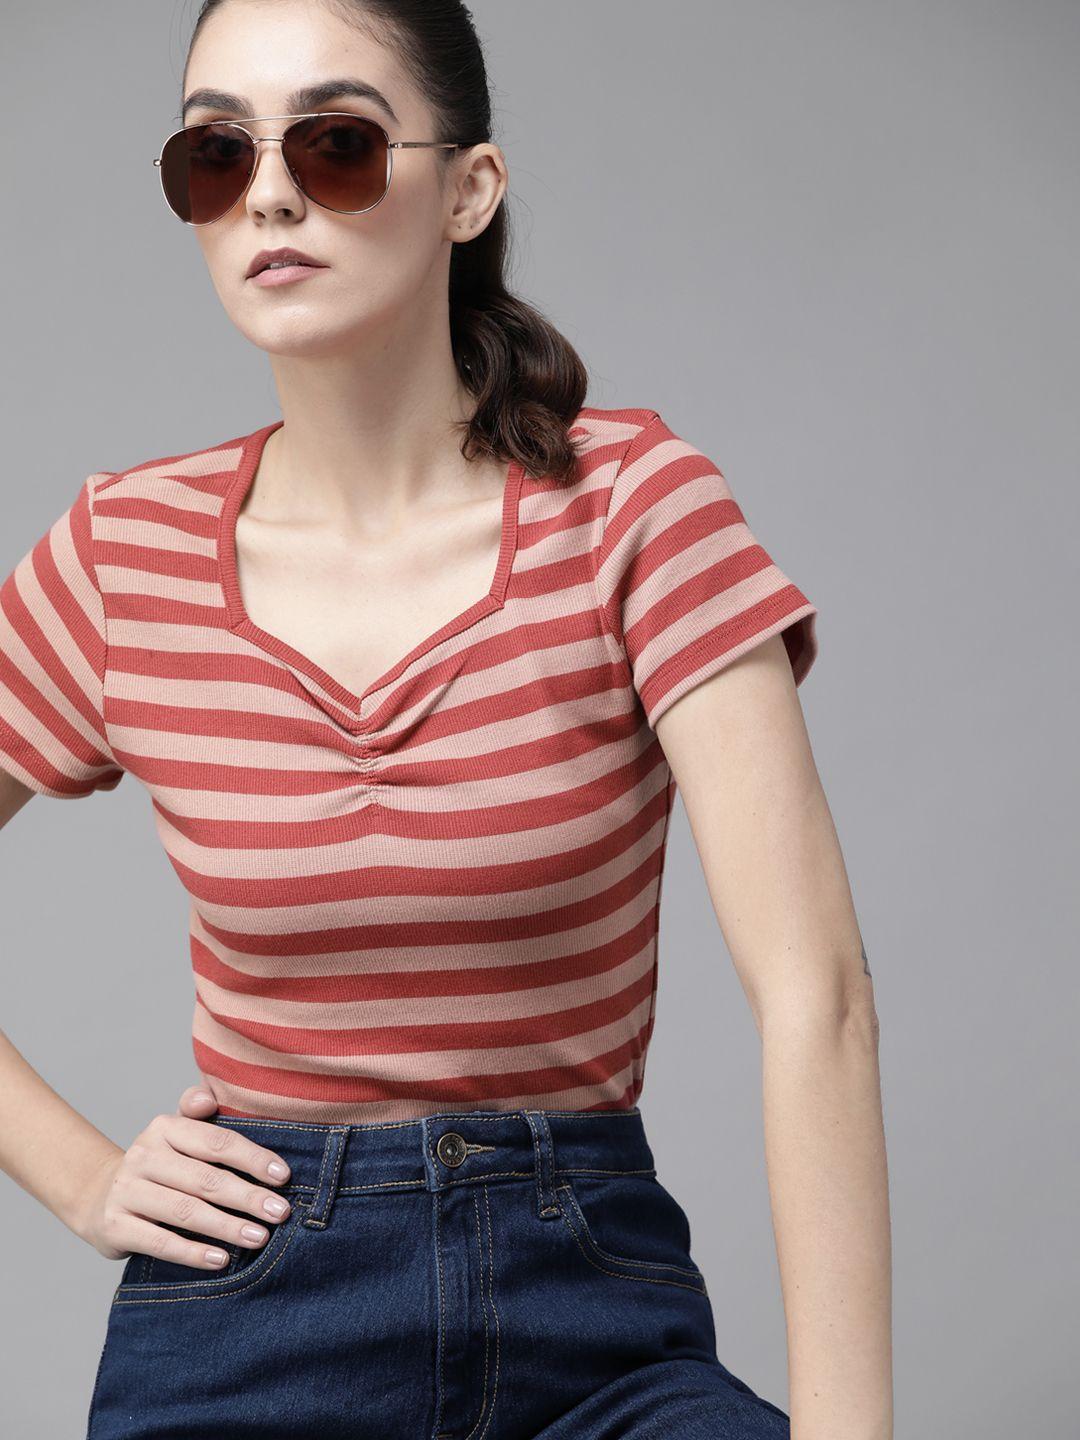 roadster dusty pink & red striped sweetheart neck top